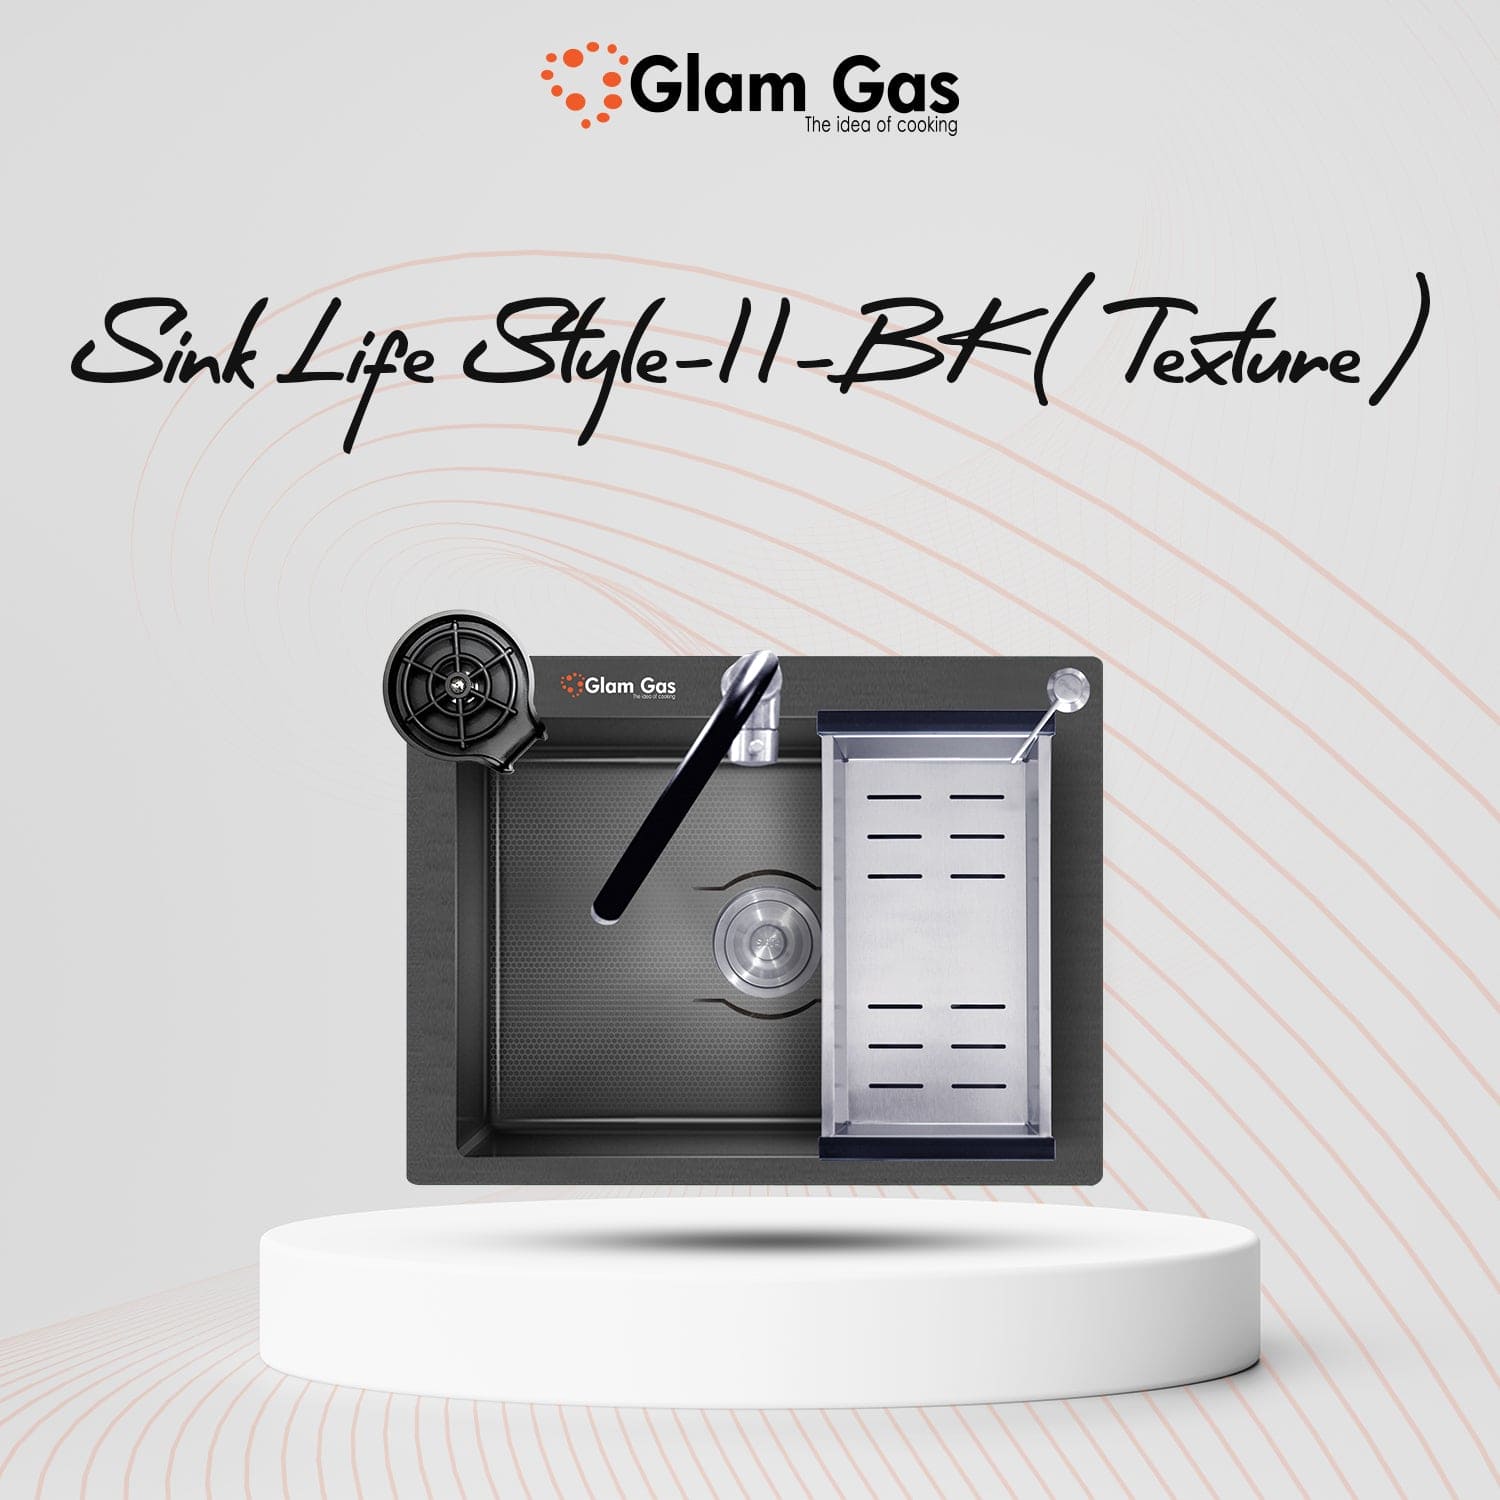 Online Buy Now The GlamGas Sink Lifestyle 11 BK (Texture) in Pakistan